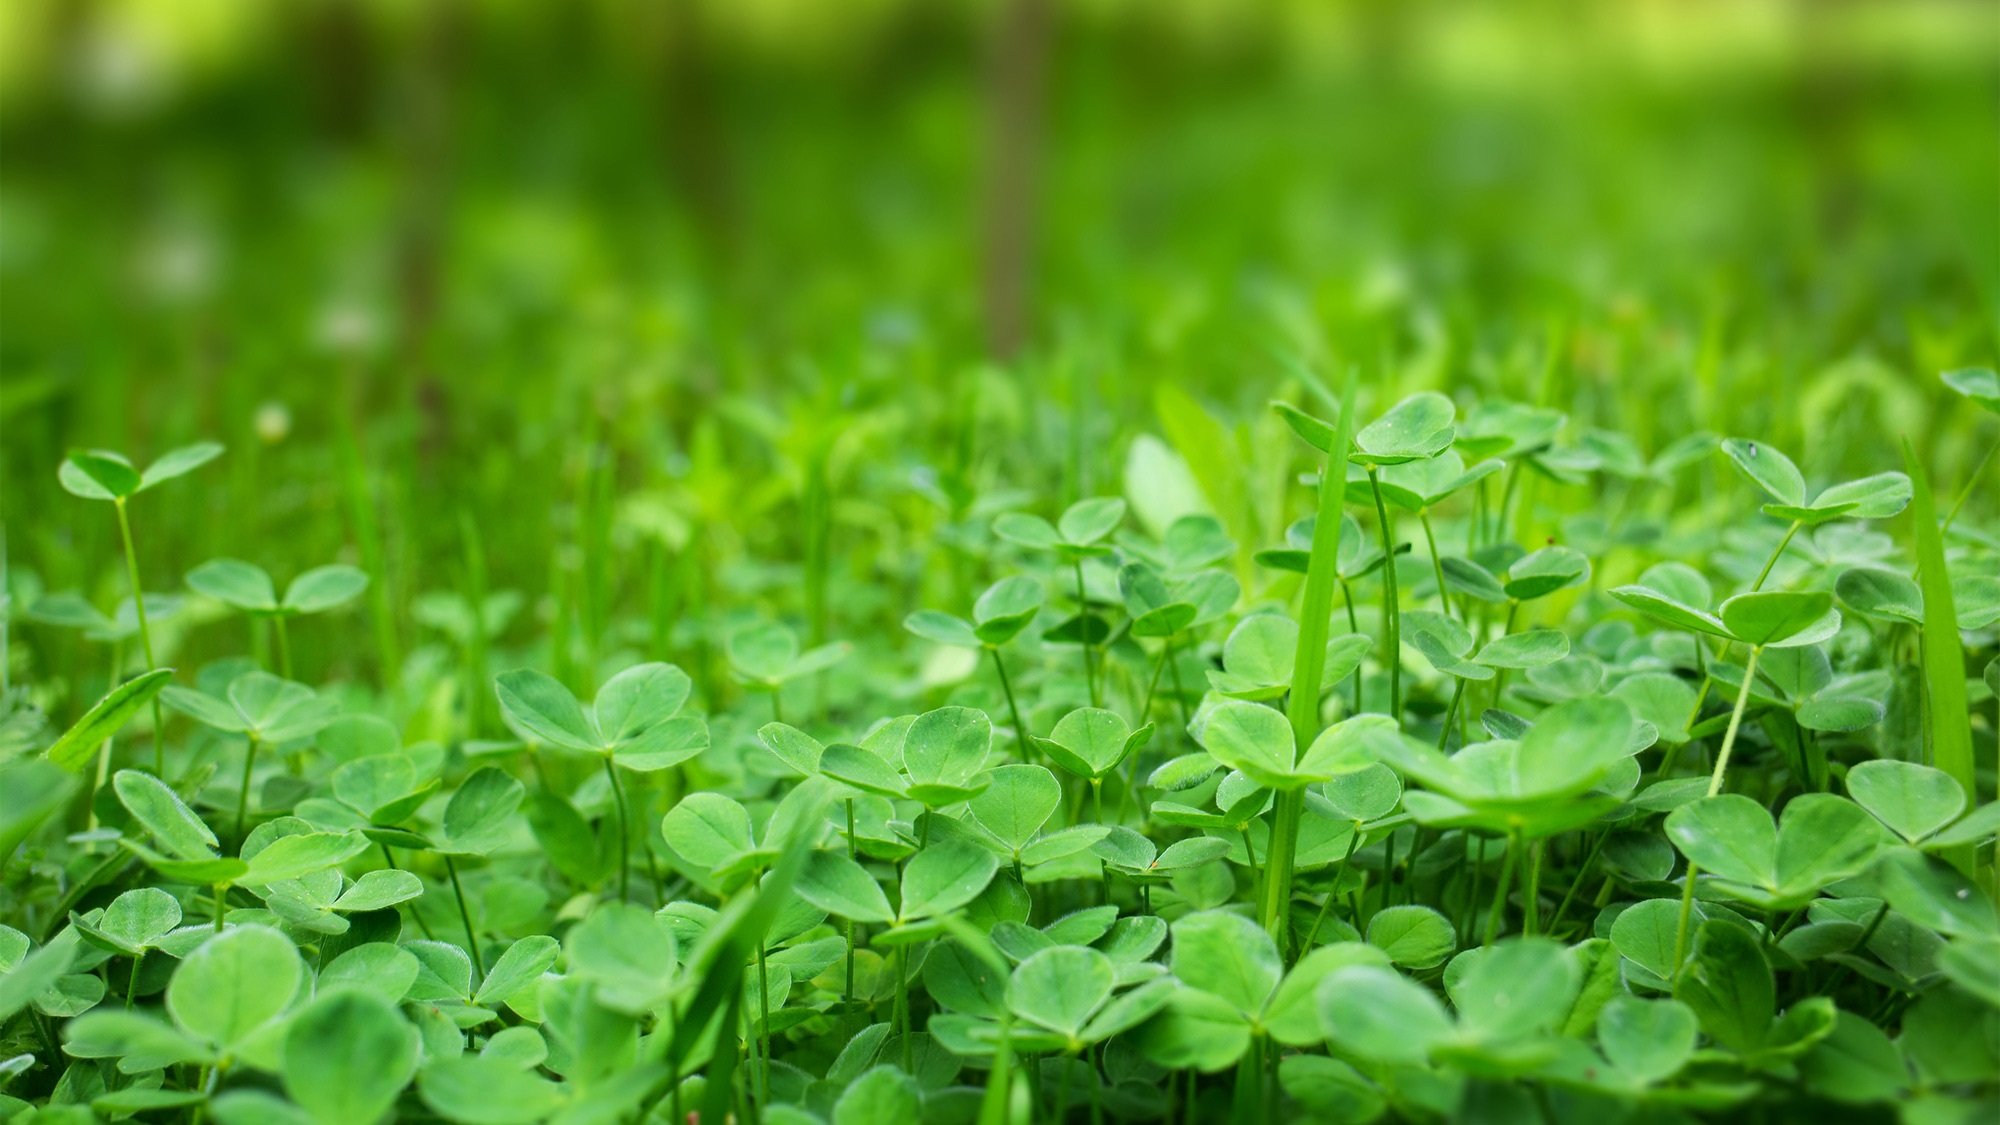 How to Kill Clover Without Chemicals